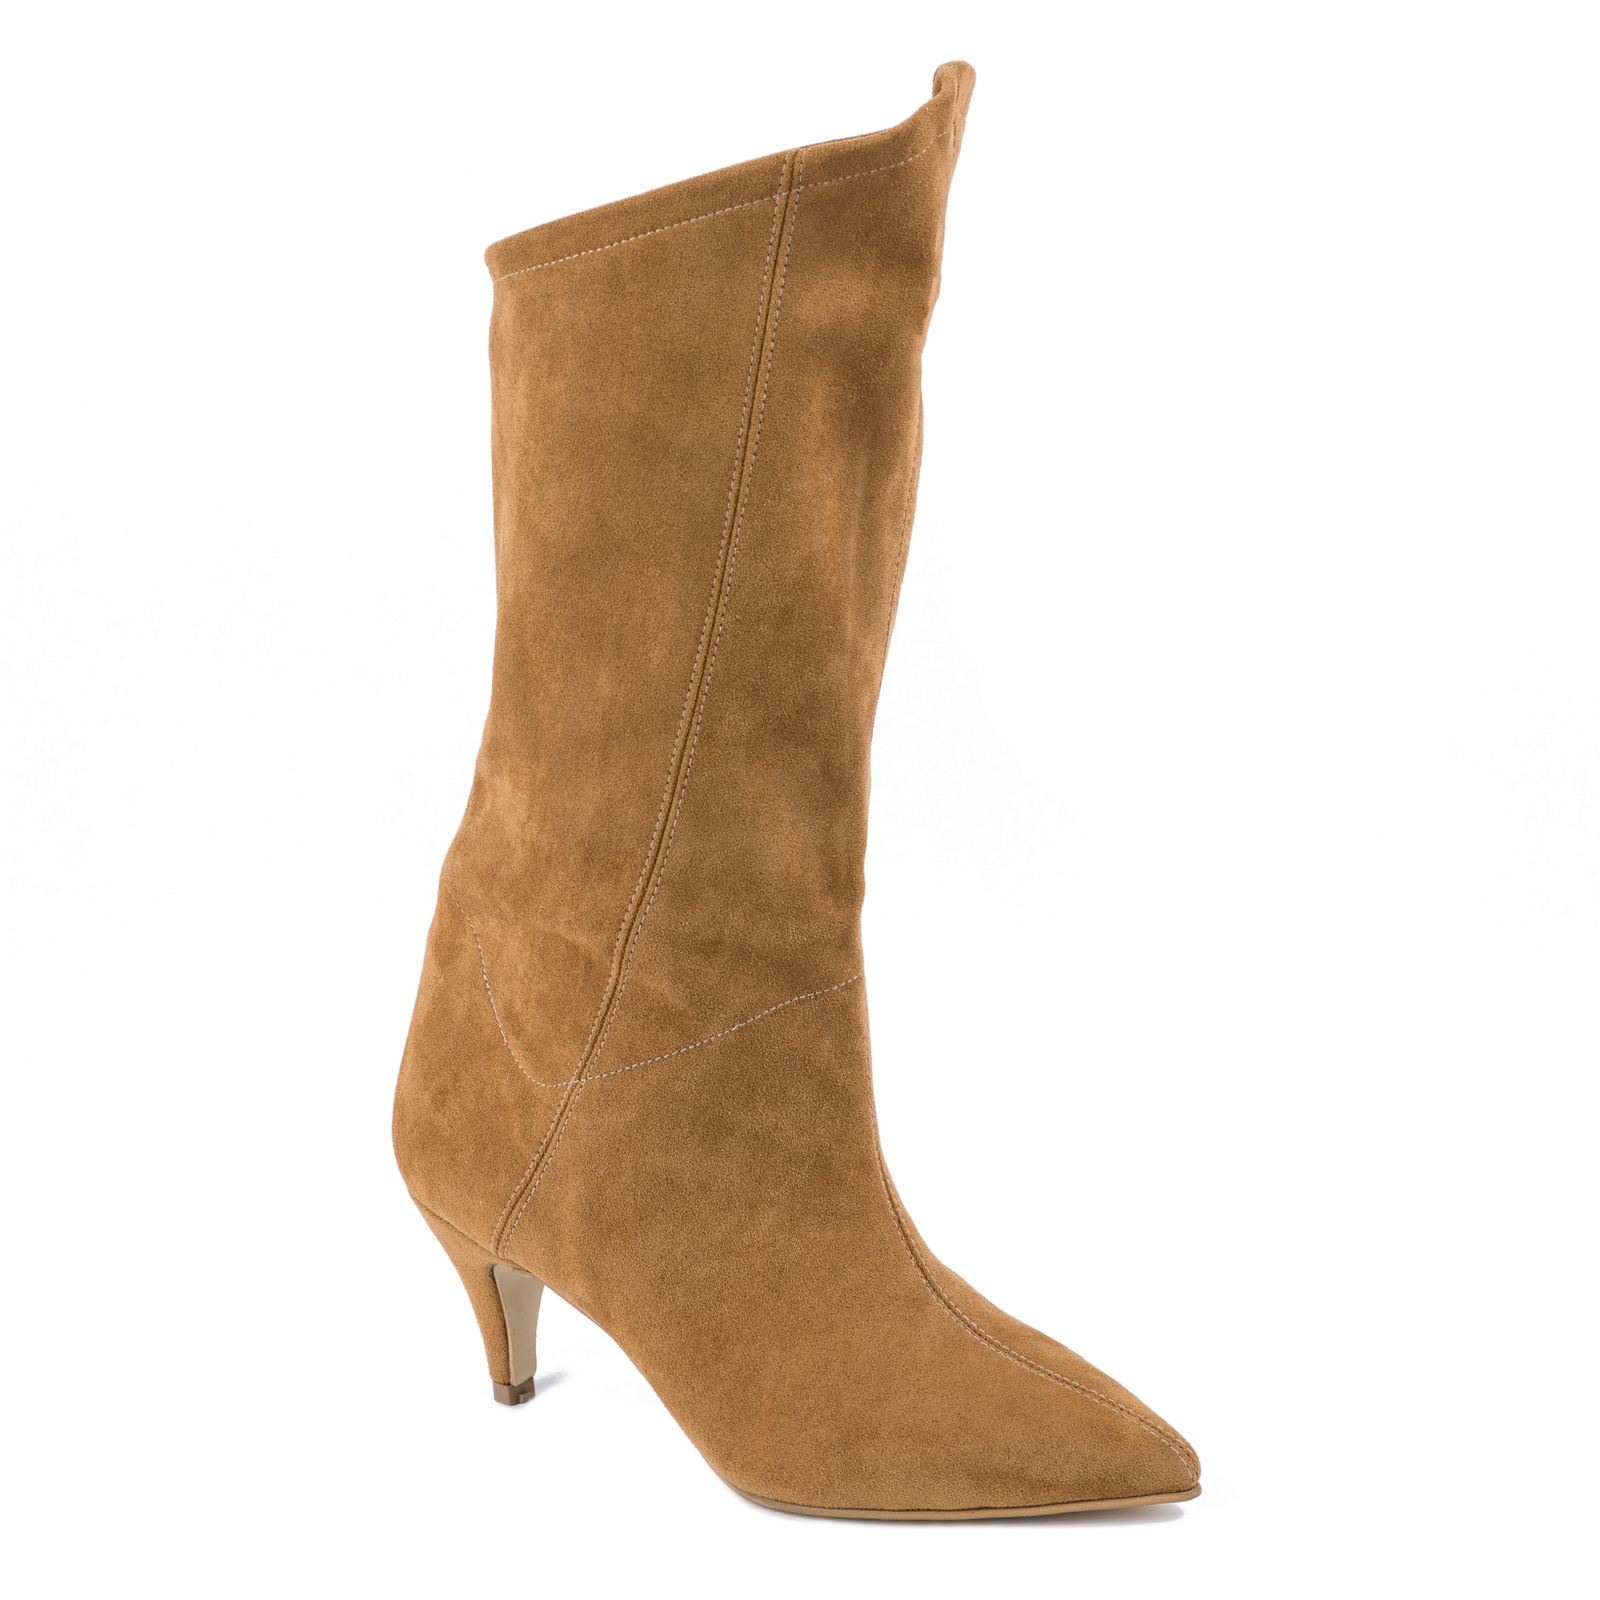 VELOUR POINTED BOOTS WITH THIN HEEL - CAMEL